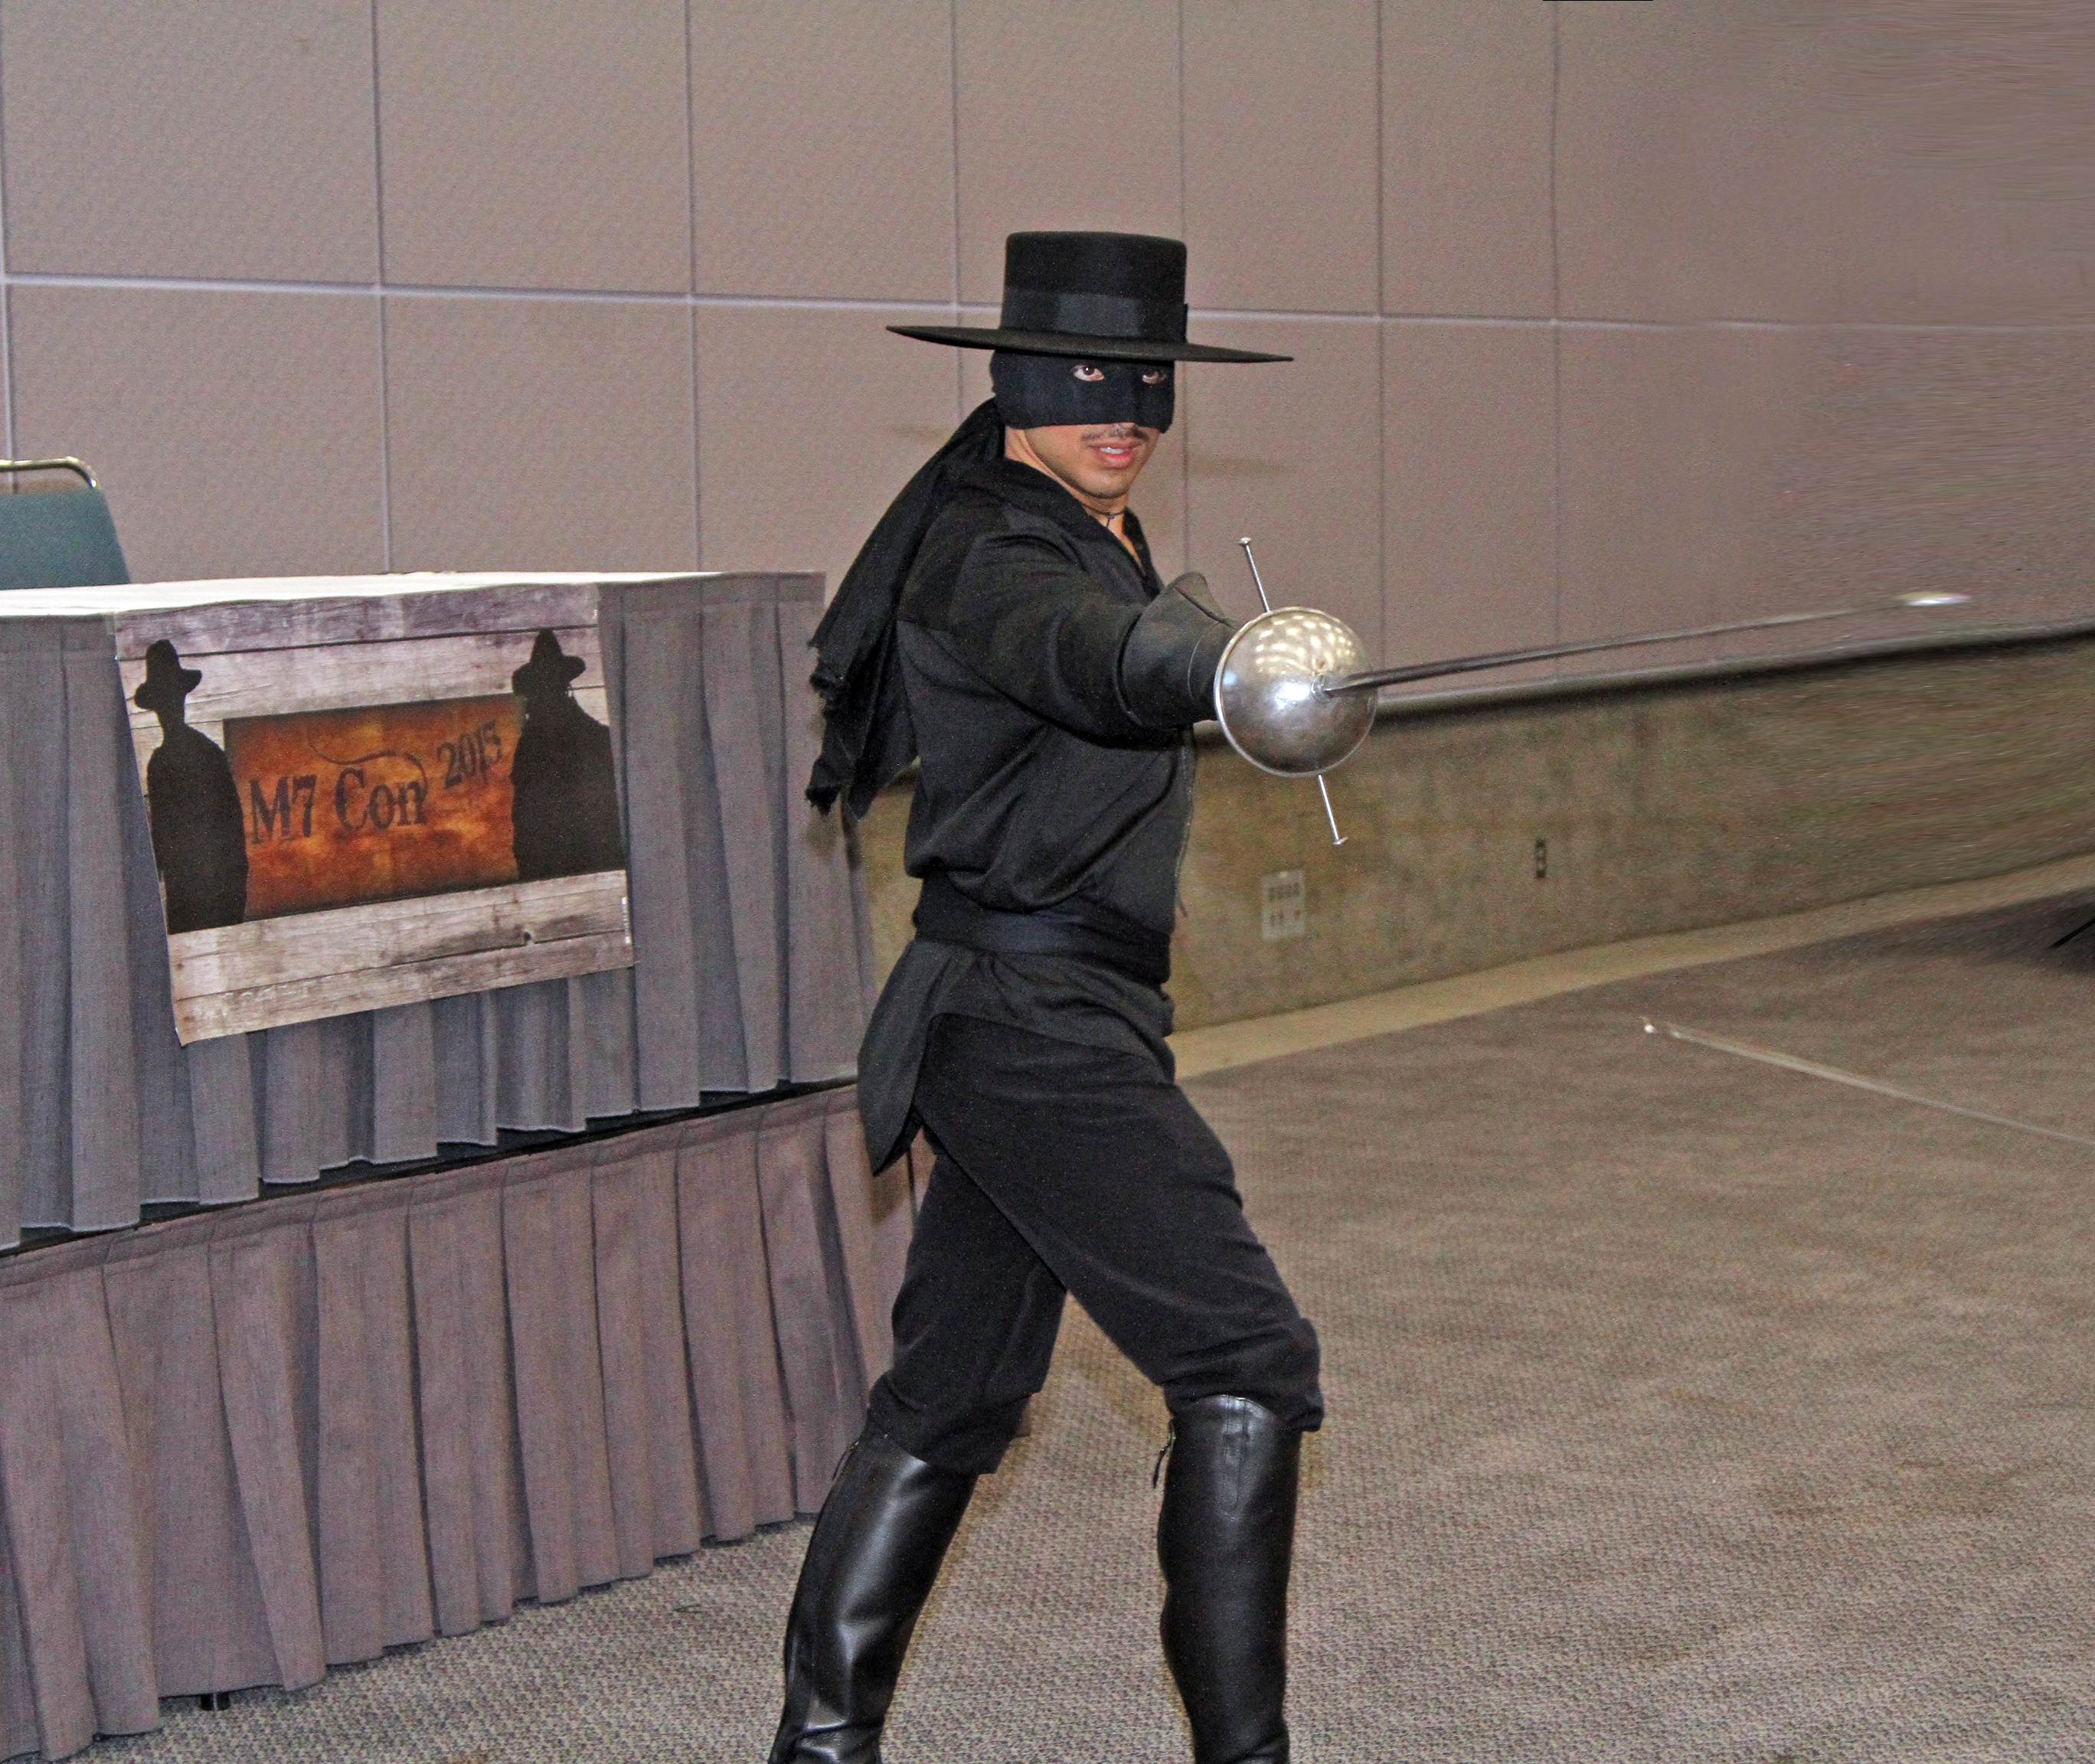 Alex Kruz performs at The Return of Zorro at the Los Angeles Convention Center on October 23, 2015 in Los Angeles, California.